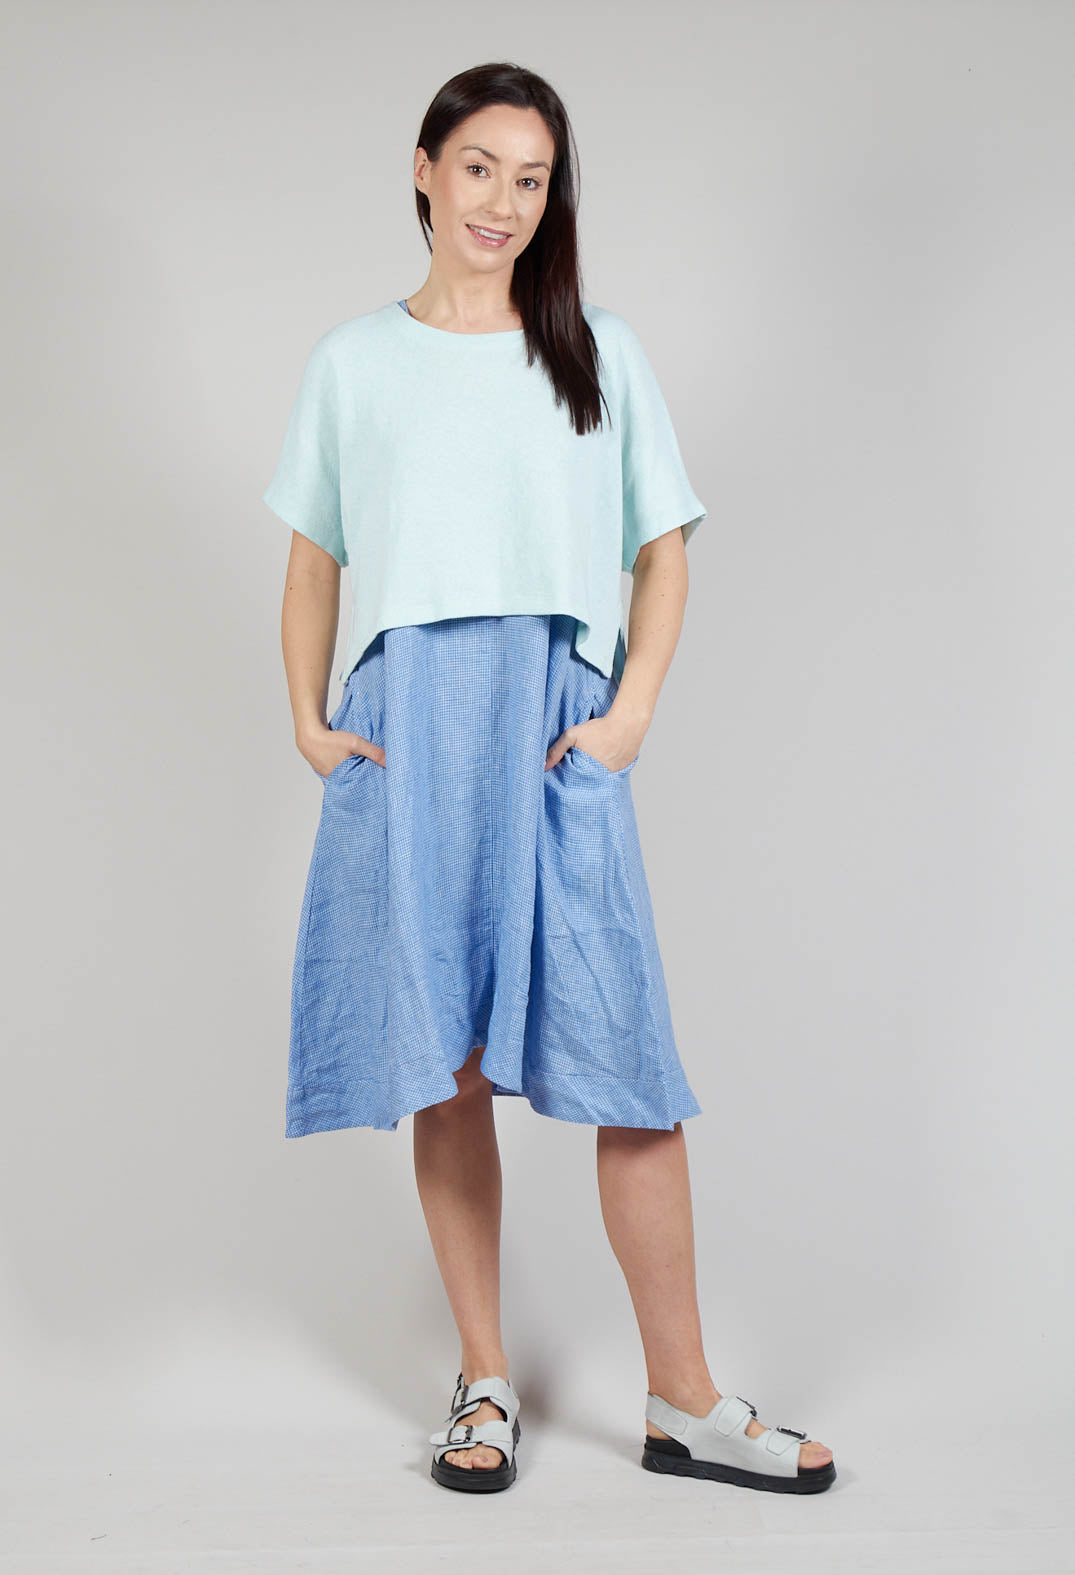 Cropped T-Shirt in Jade